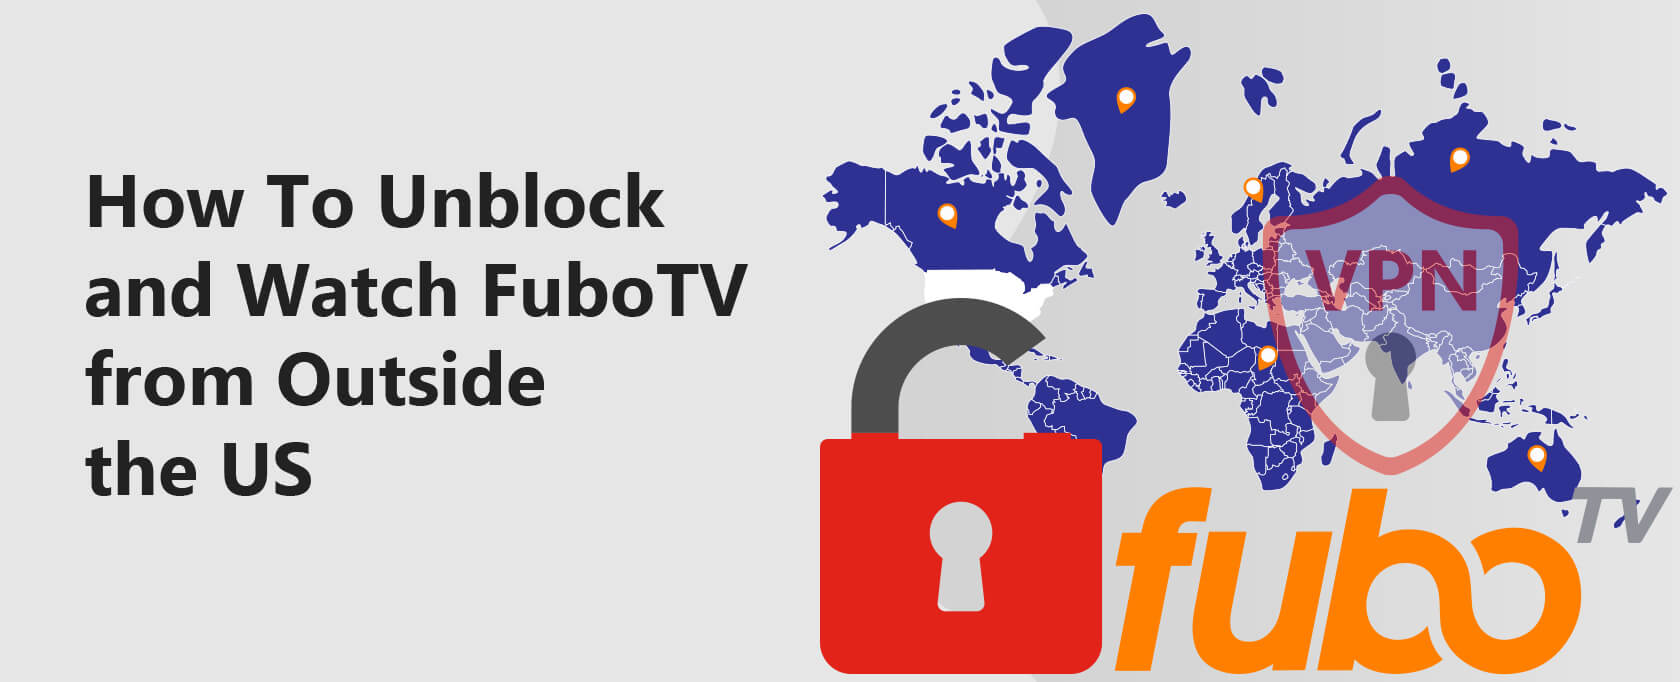 FuboTV VPN: How To Watch and Unblock FuboTV from Outside the US?